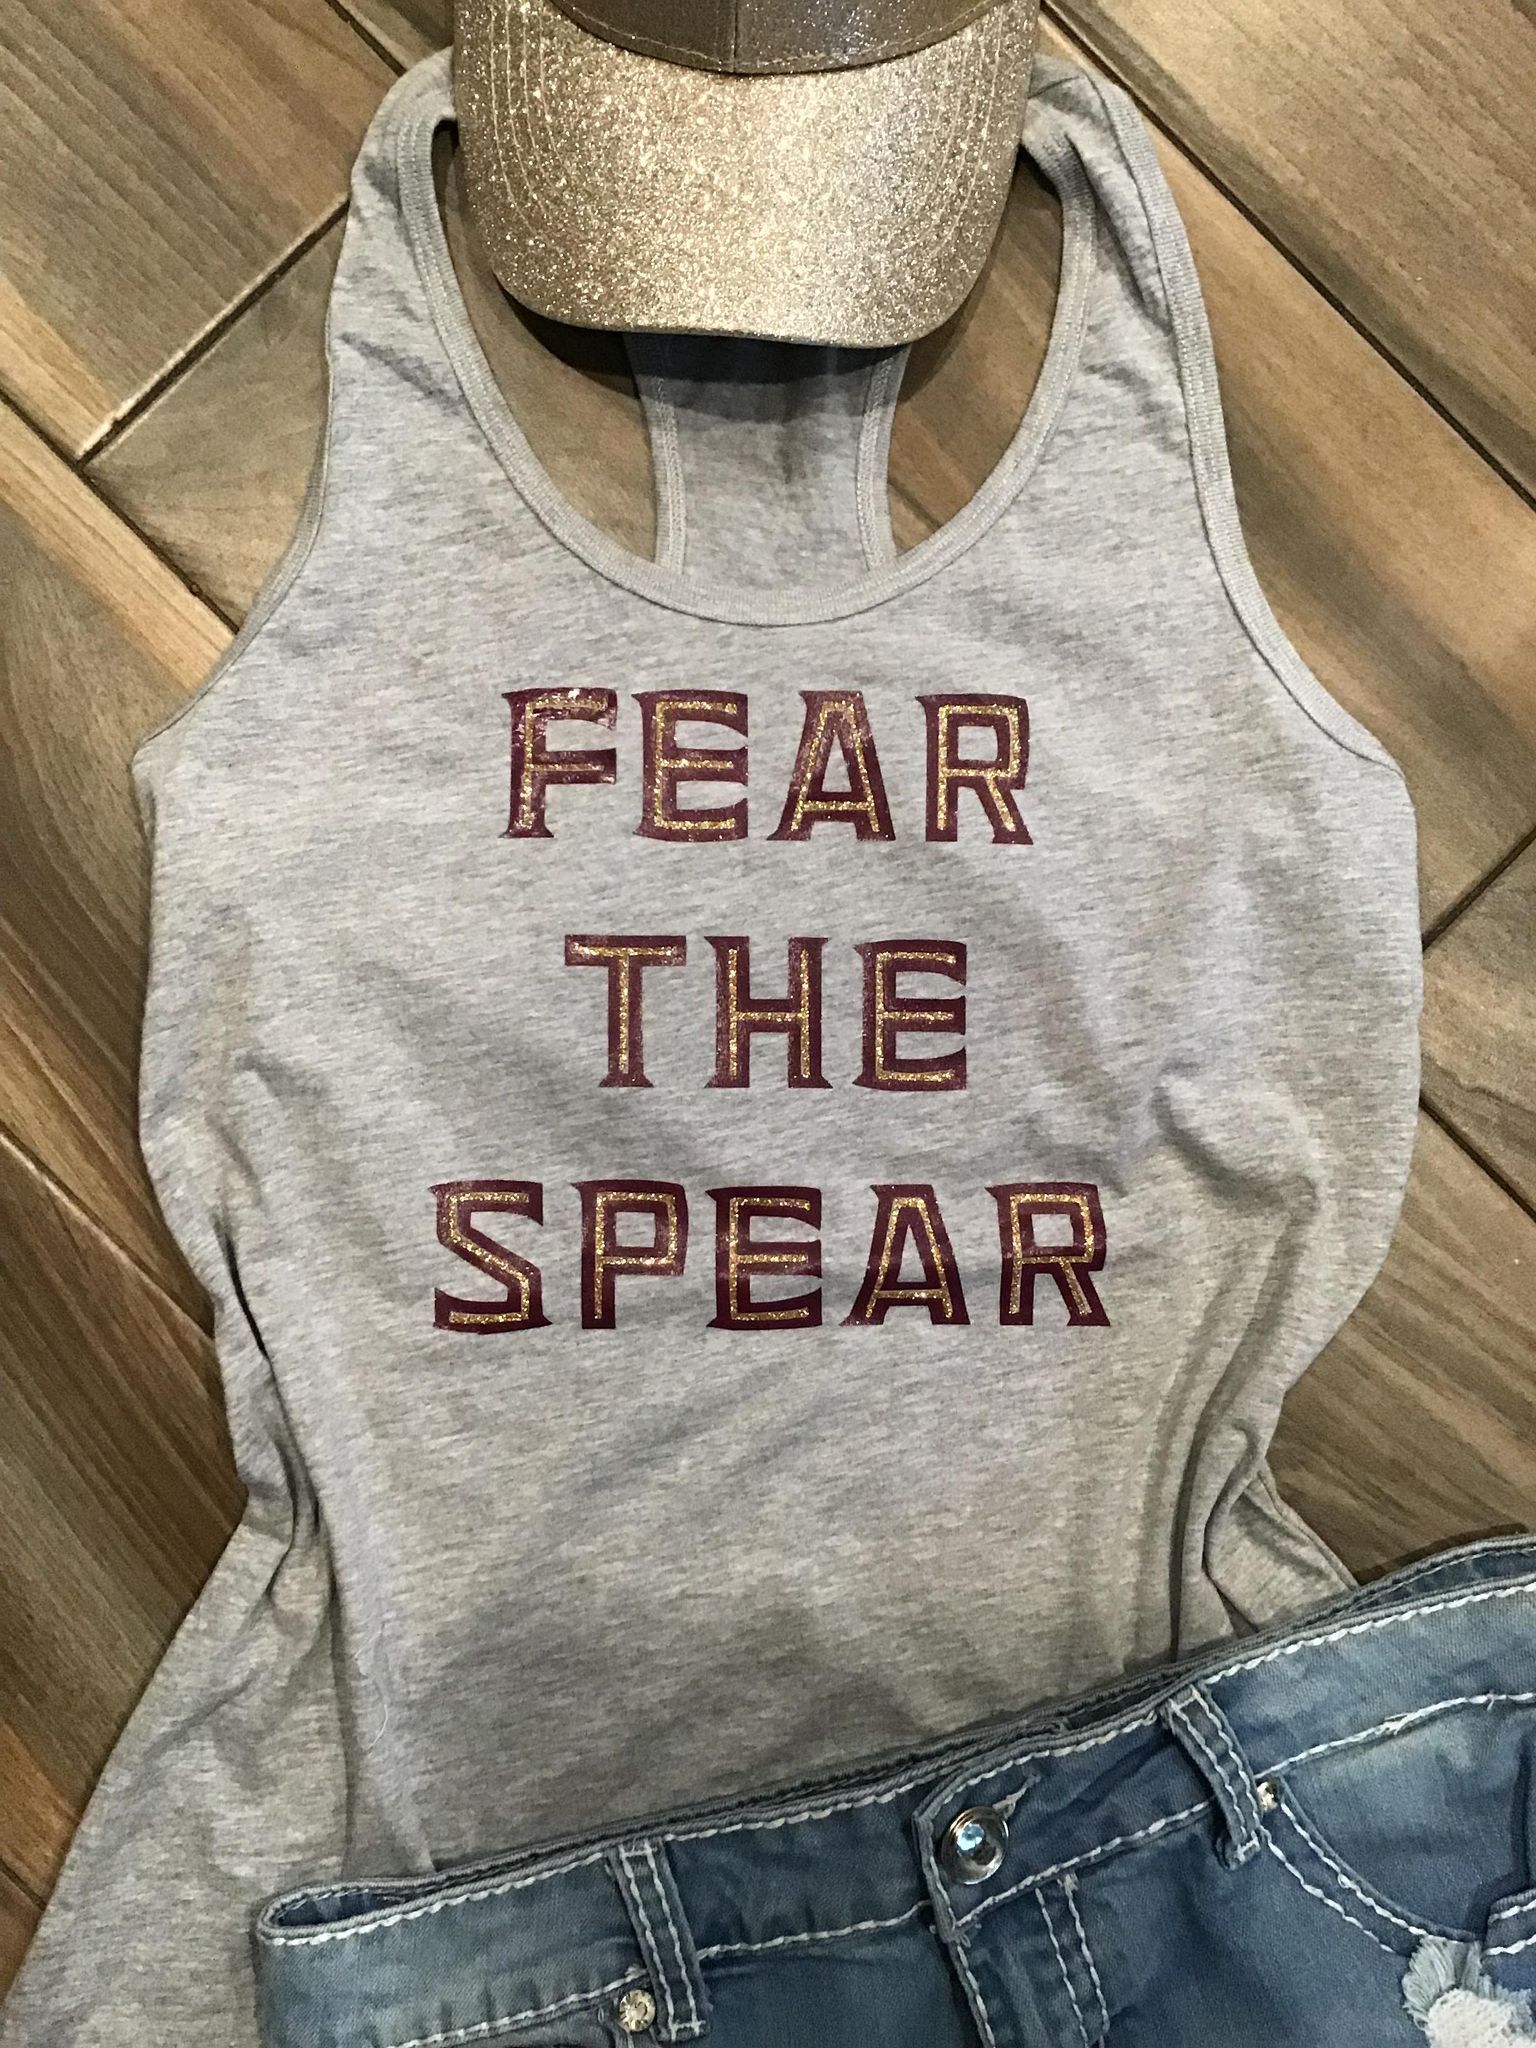 Florida State Fear the Spear Glitter Top